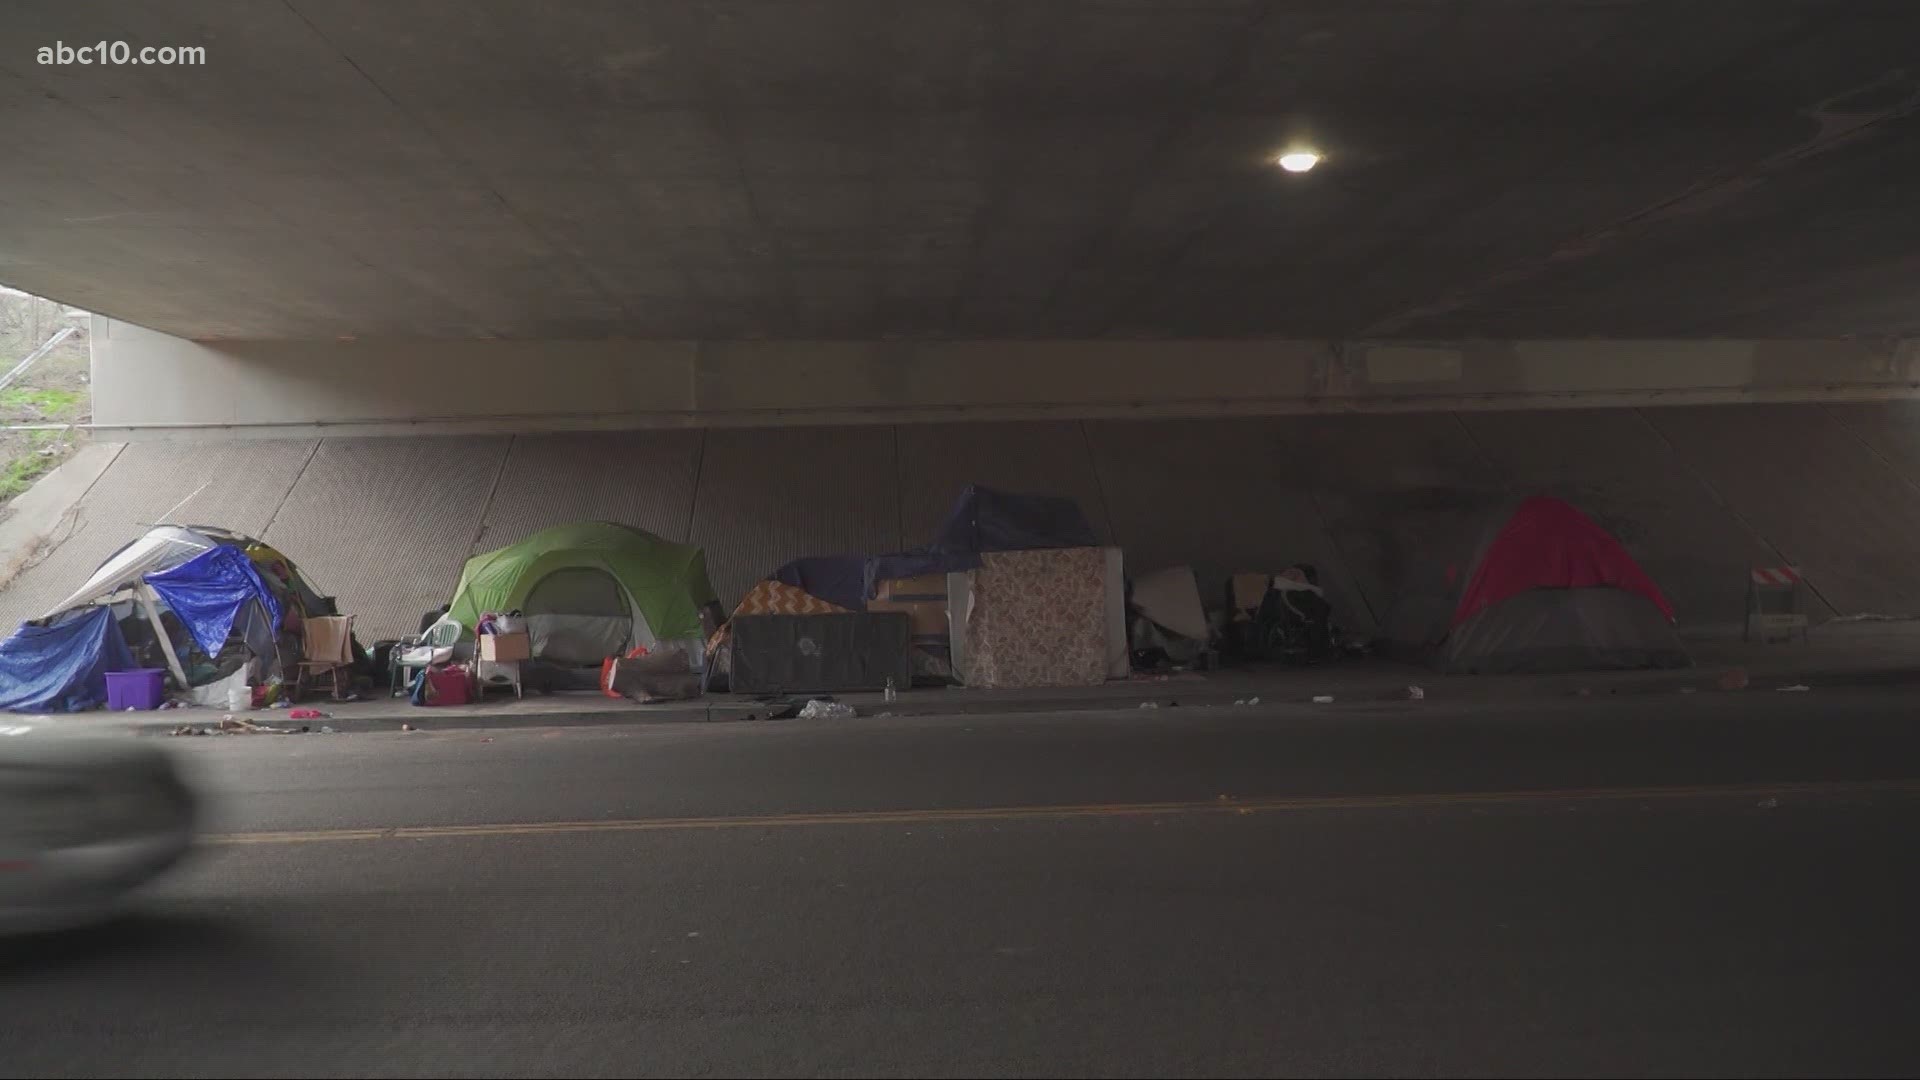 The Sacramento Homeless Union said they believe as many as four unhoused people died in last week's storm and put the blame on Mayor Steinberg.